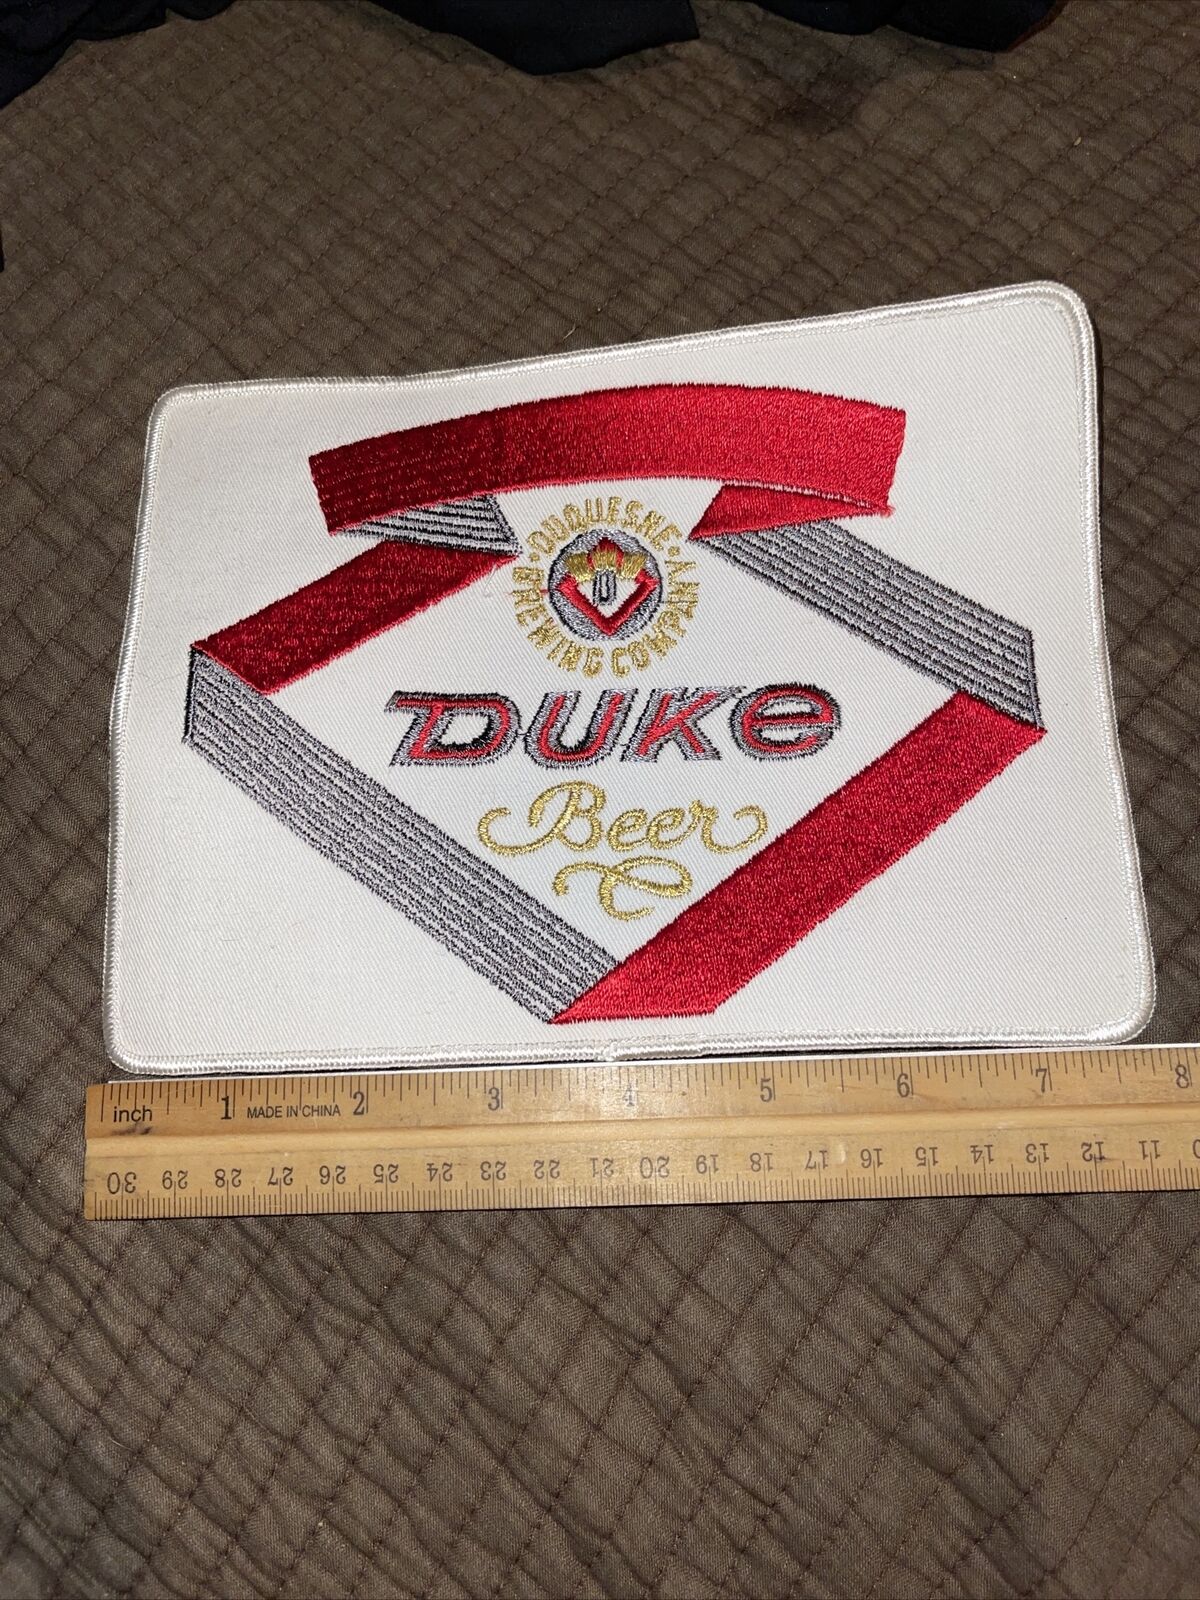 Duke Beer Duquesne Brewing Company Patch Back Jacket Vintage Embroidered 8x6